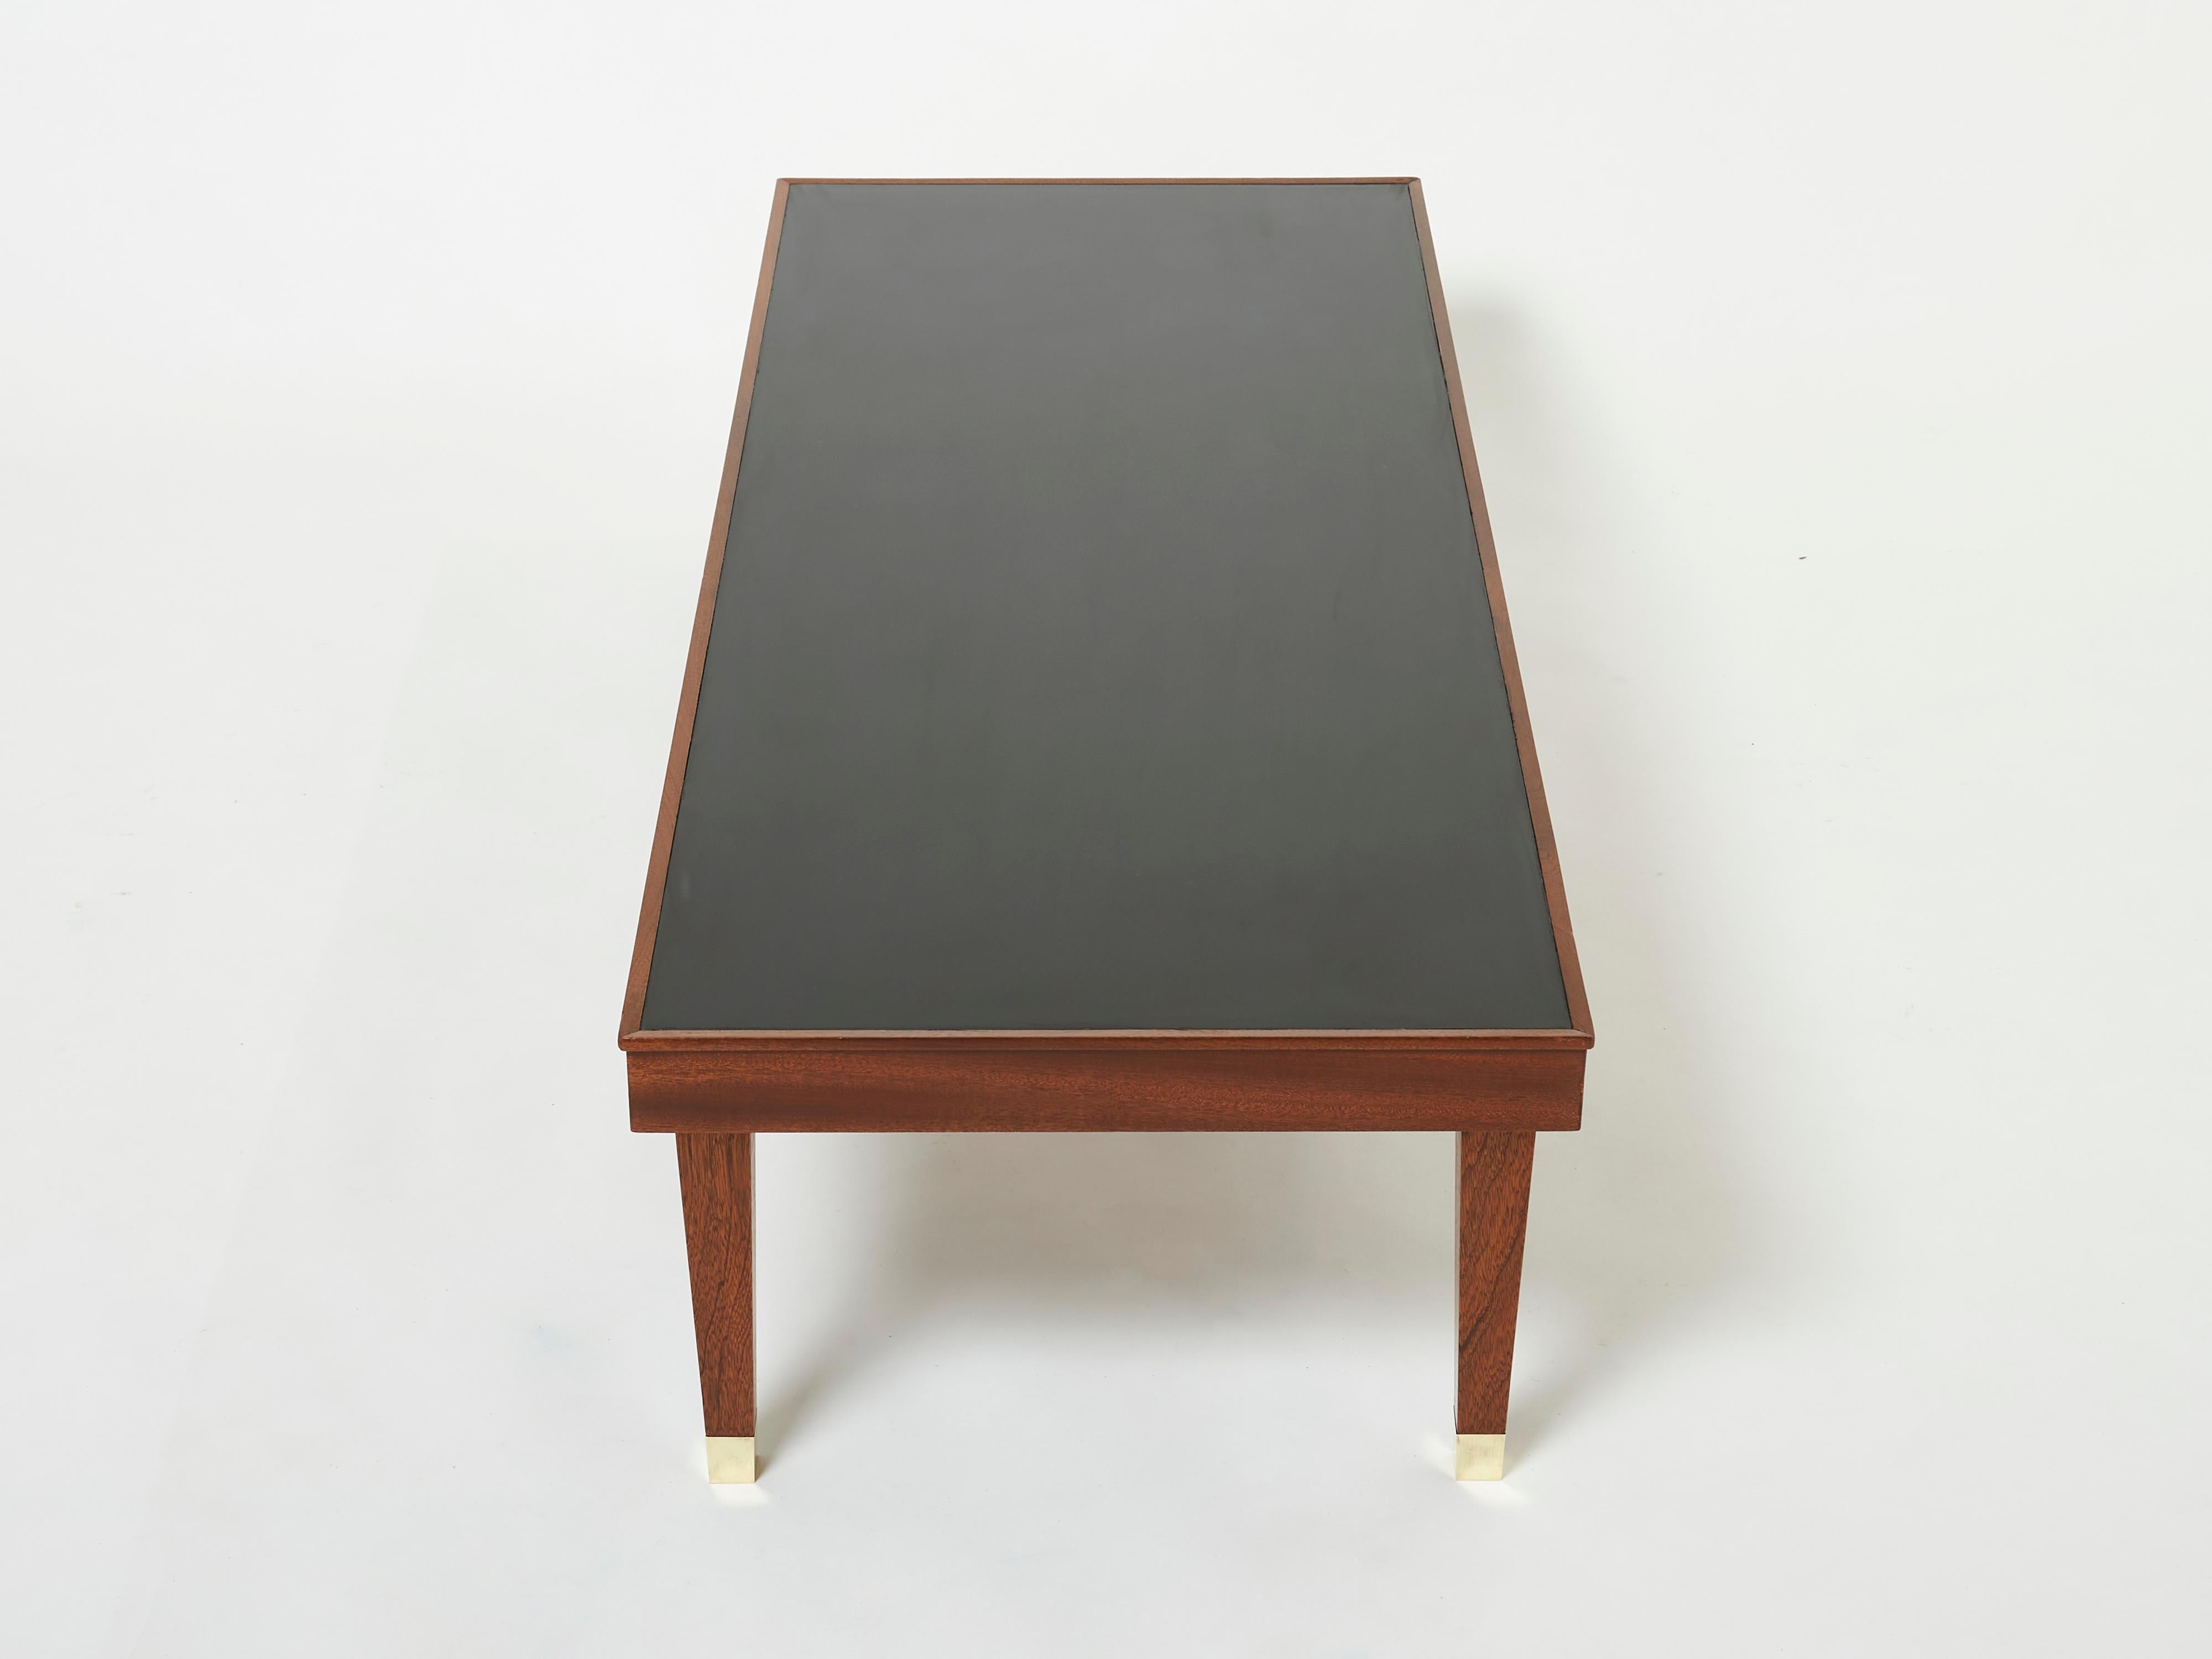 Jacques Adnet Mahogany Brass Modernist Coffee Table, 1950s For Sale 1